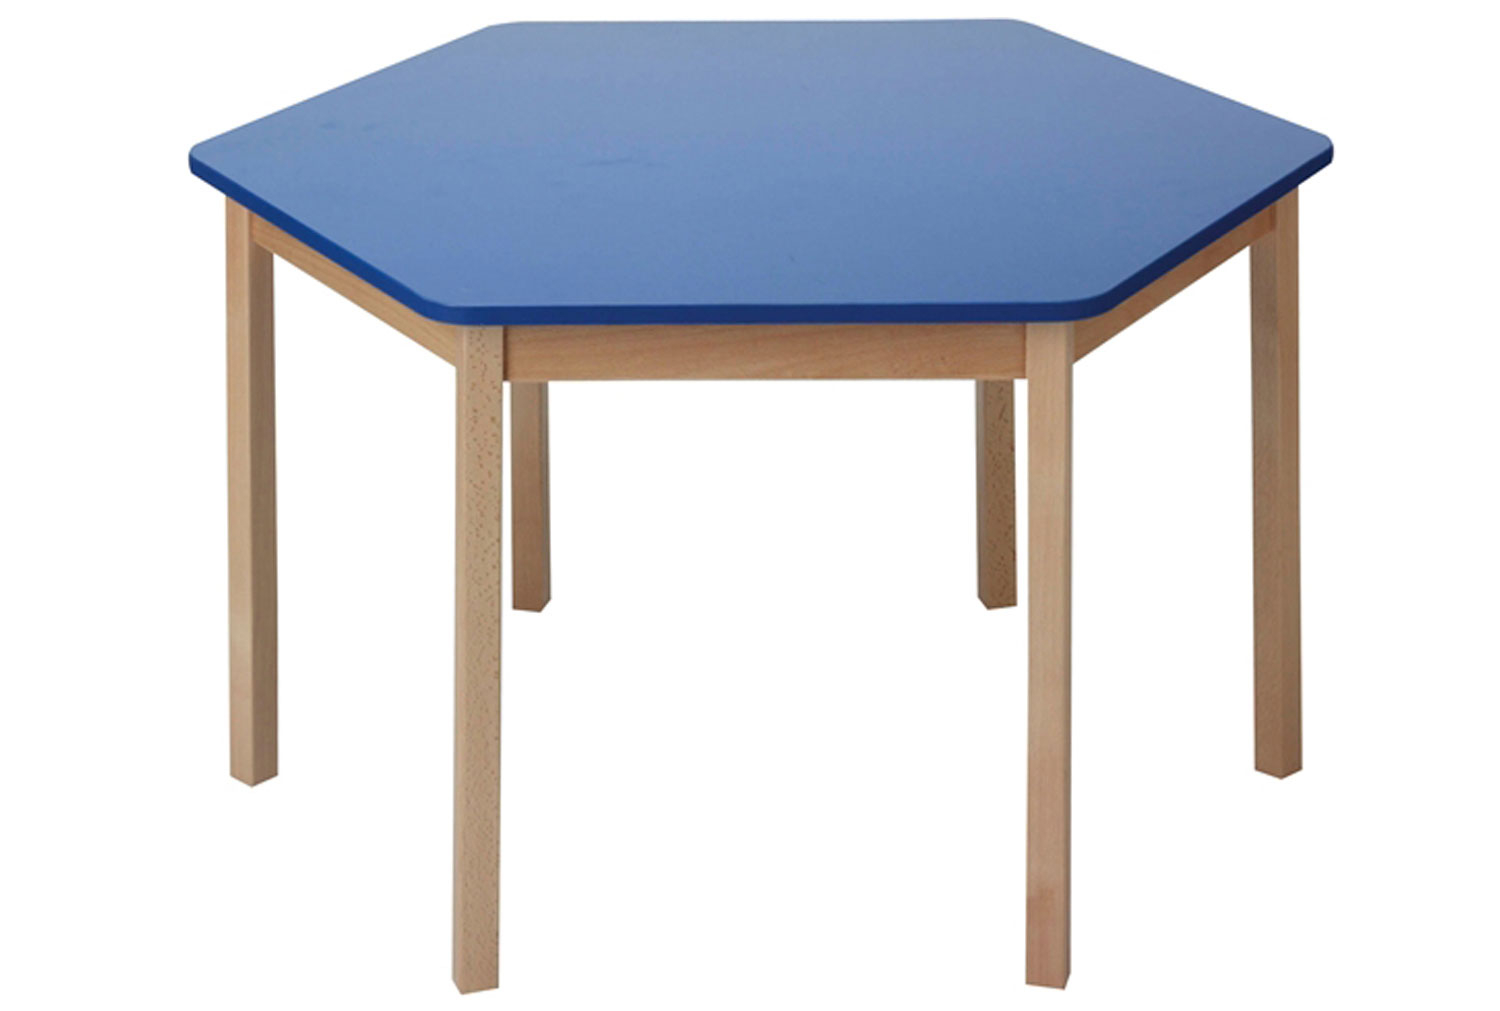 Early Years Natural Wooden Hexagonal Classroom Table, 5-7 Years - 55h (cm), Beech